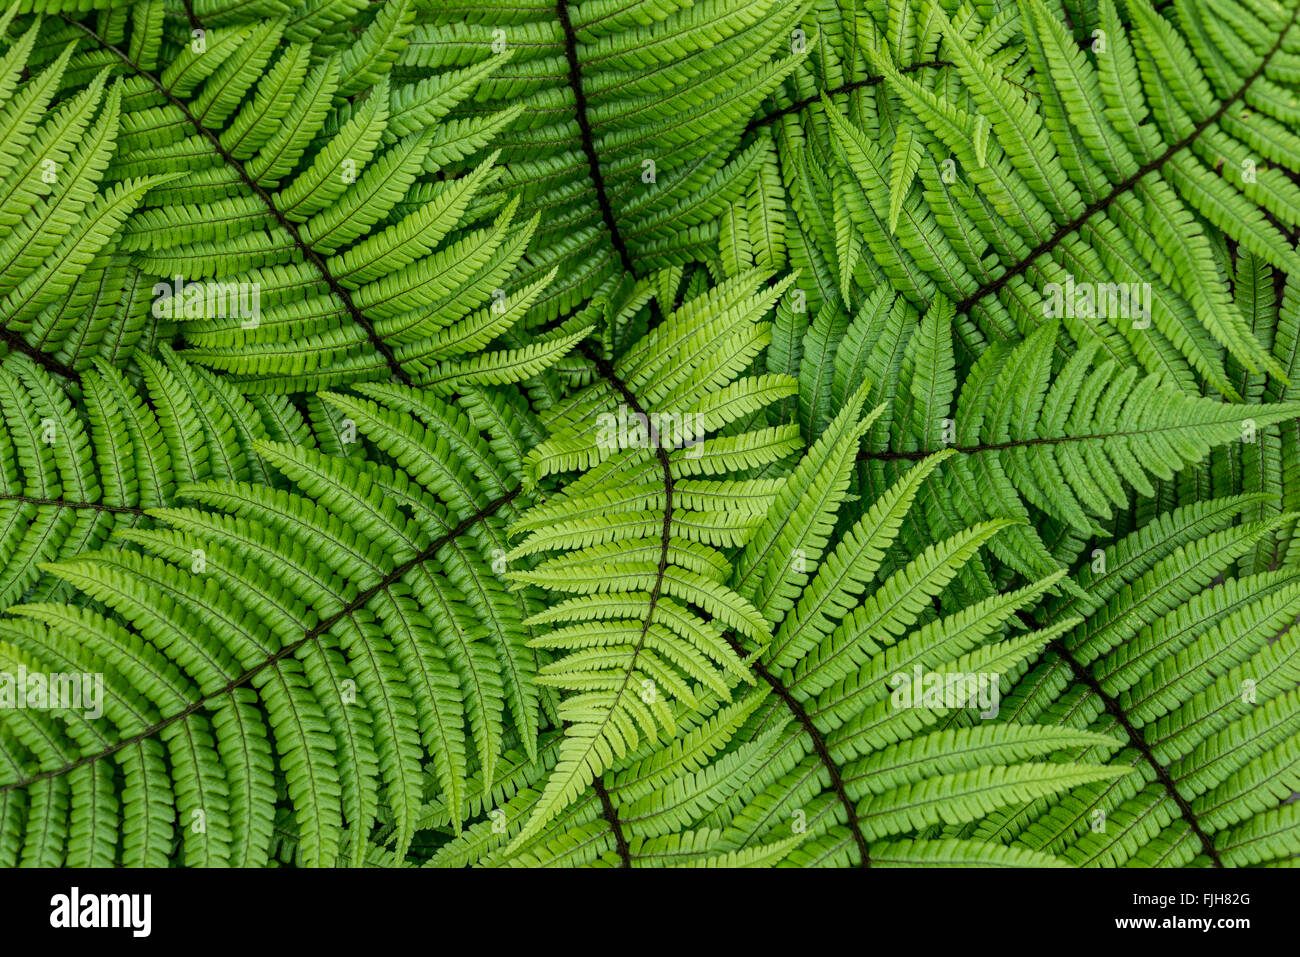 Vibrant abstract backdrop of Ferns Stock Photo